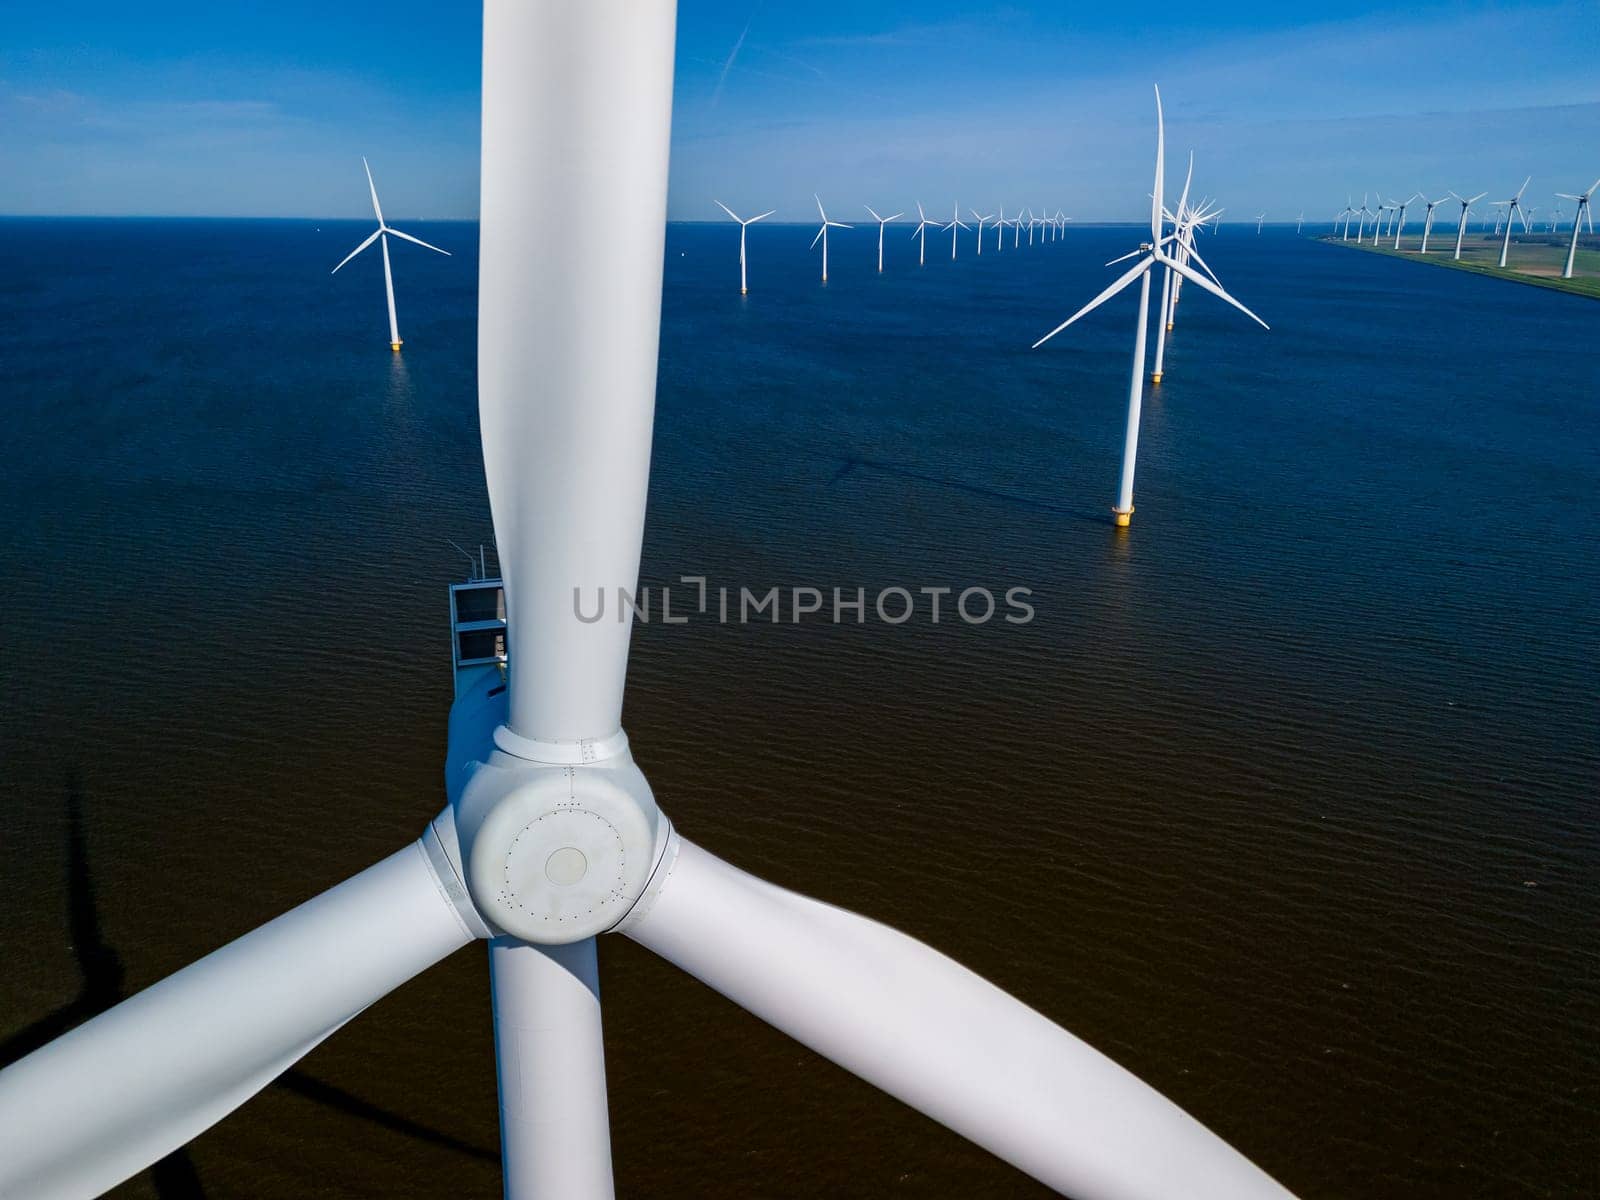 wind farm in the ocean off the coast of Flevoland, Netherlands, with rows of windmill turbines by fokkebok